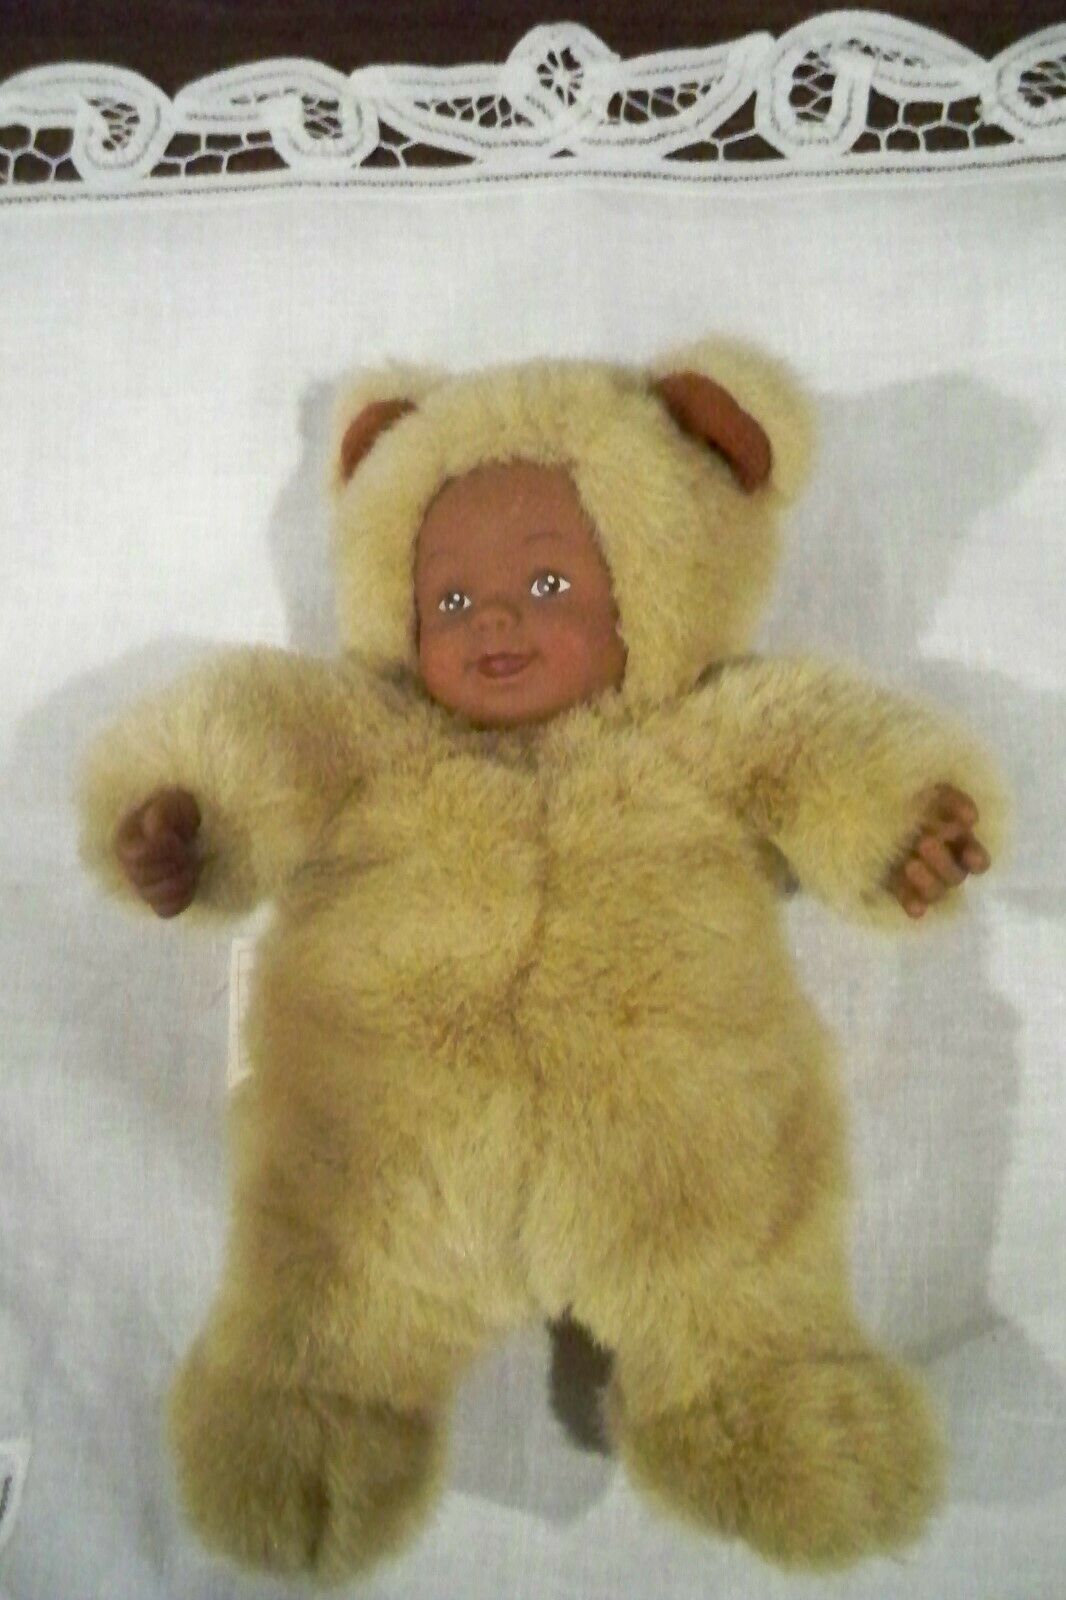 Vintage 1998 Anne Geddes - Baby Bears Collectible Plush Bean-filled Doll